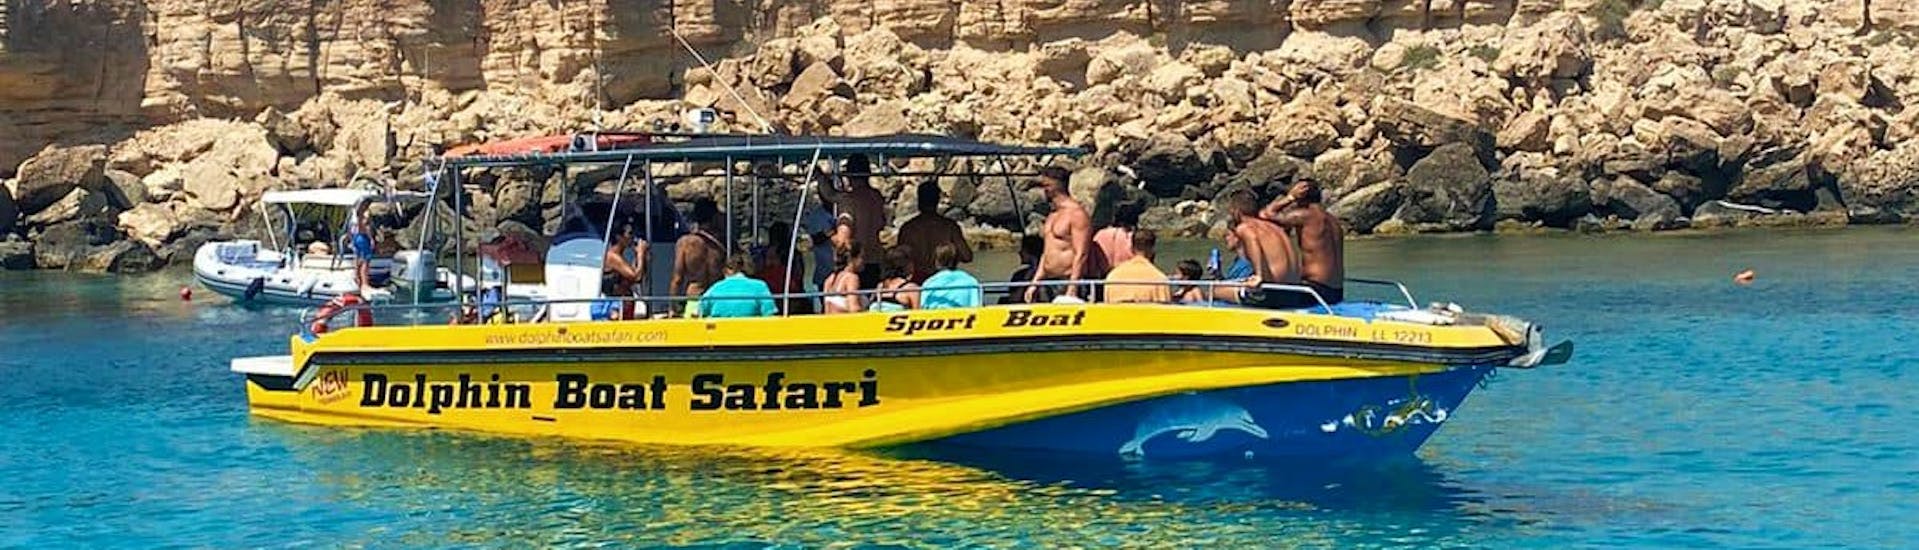 Our motorboat navigating along the stunning coast of Ayia Napa during a boat trip along the Famagusta Coast, incl. the Blue Lagoon with Dolphin Boat Safari.